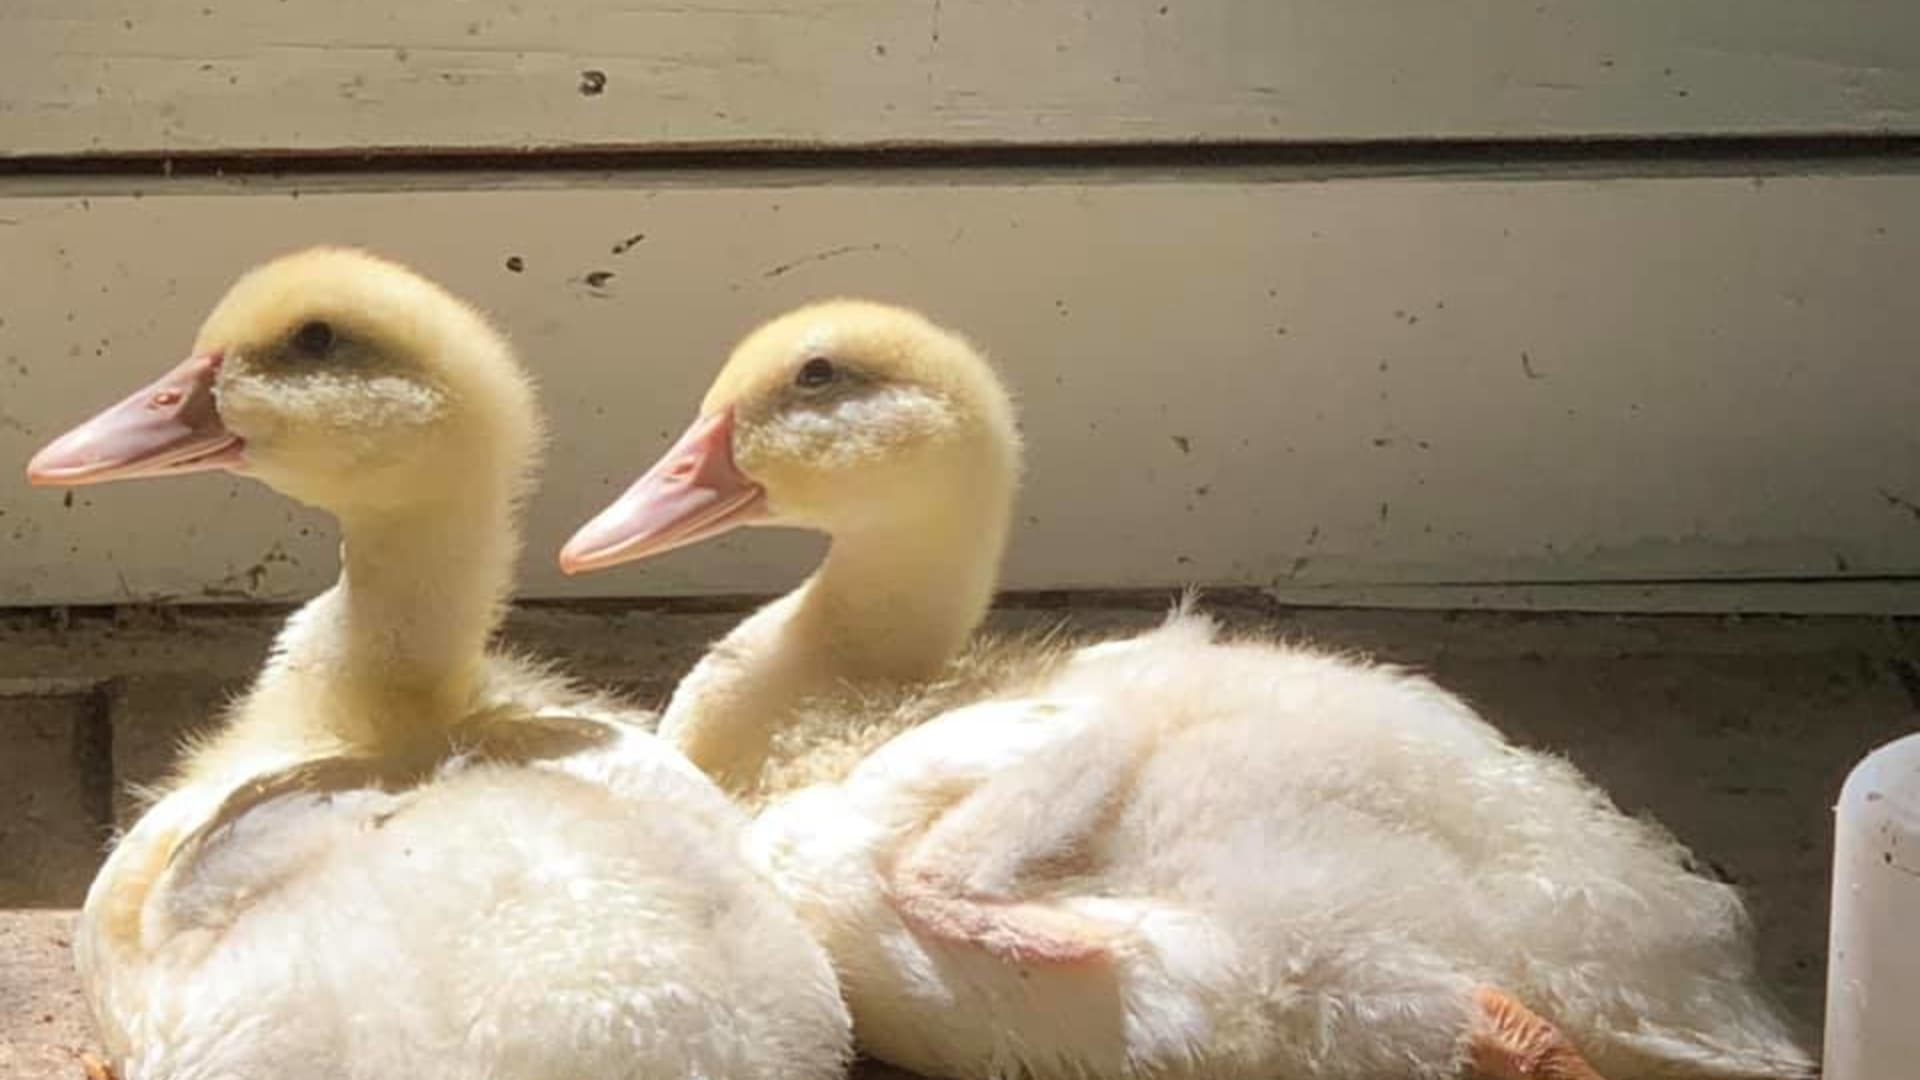 Thorne Melcher and Mandy Musselwhite own a homestead in metro Atlanta, which includes a farmhouse where they've raised six ducks, two geese and other animals.